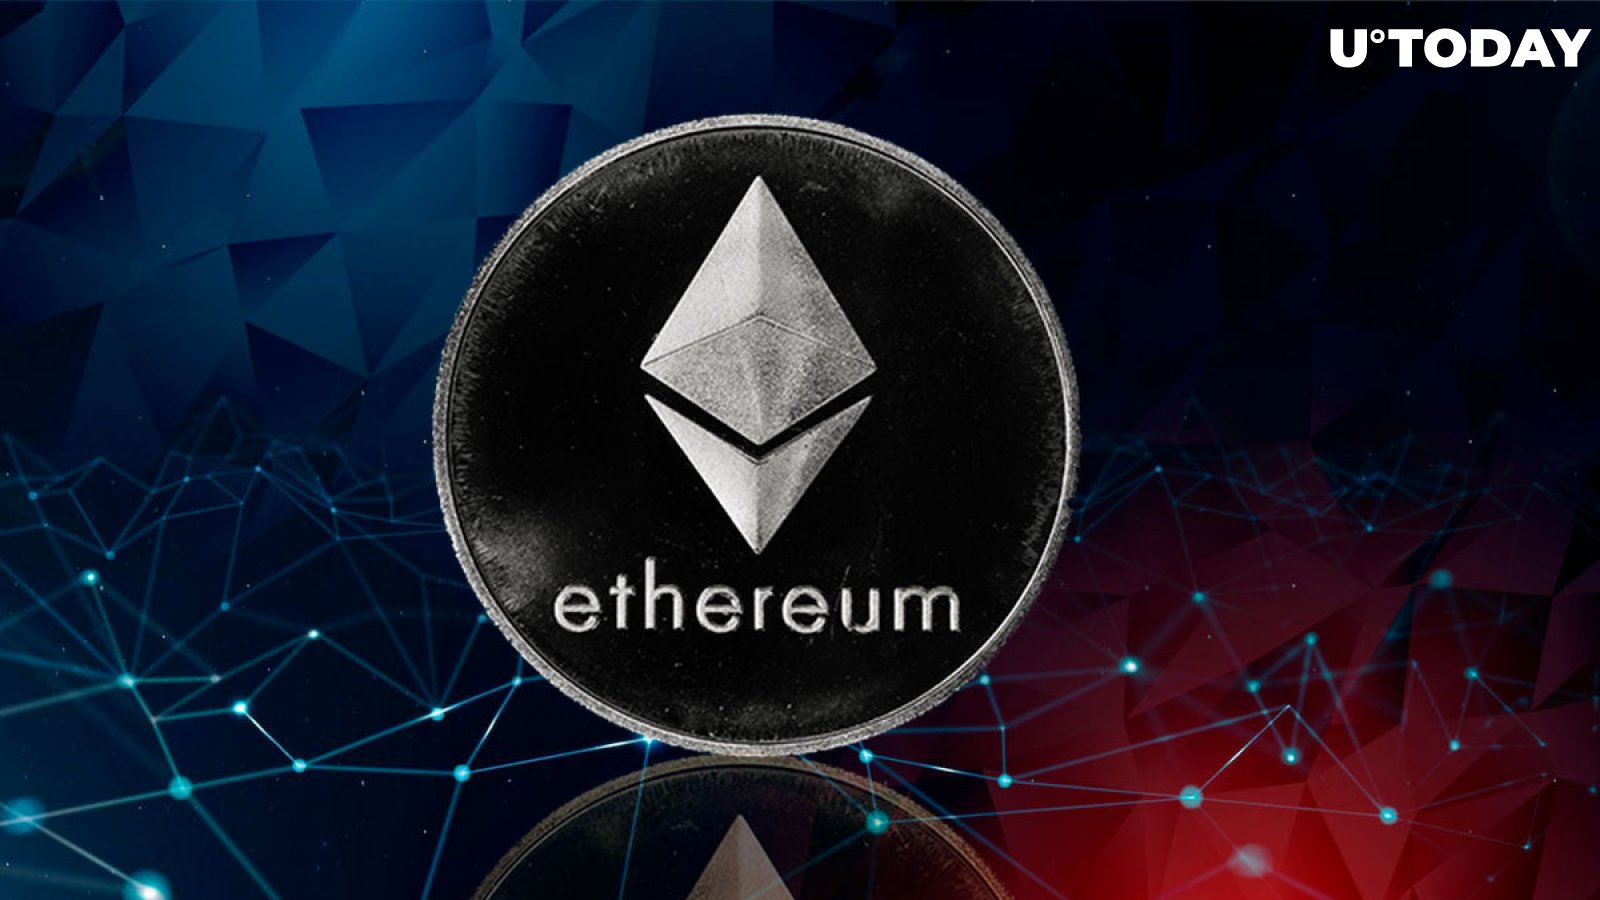 Legendary Trader John Bollinger on Ethereum Price: "Must Be Time to Pay Attention" 